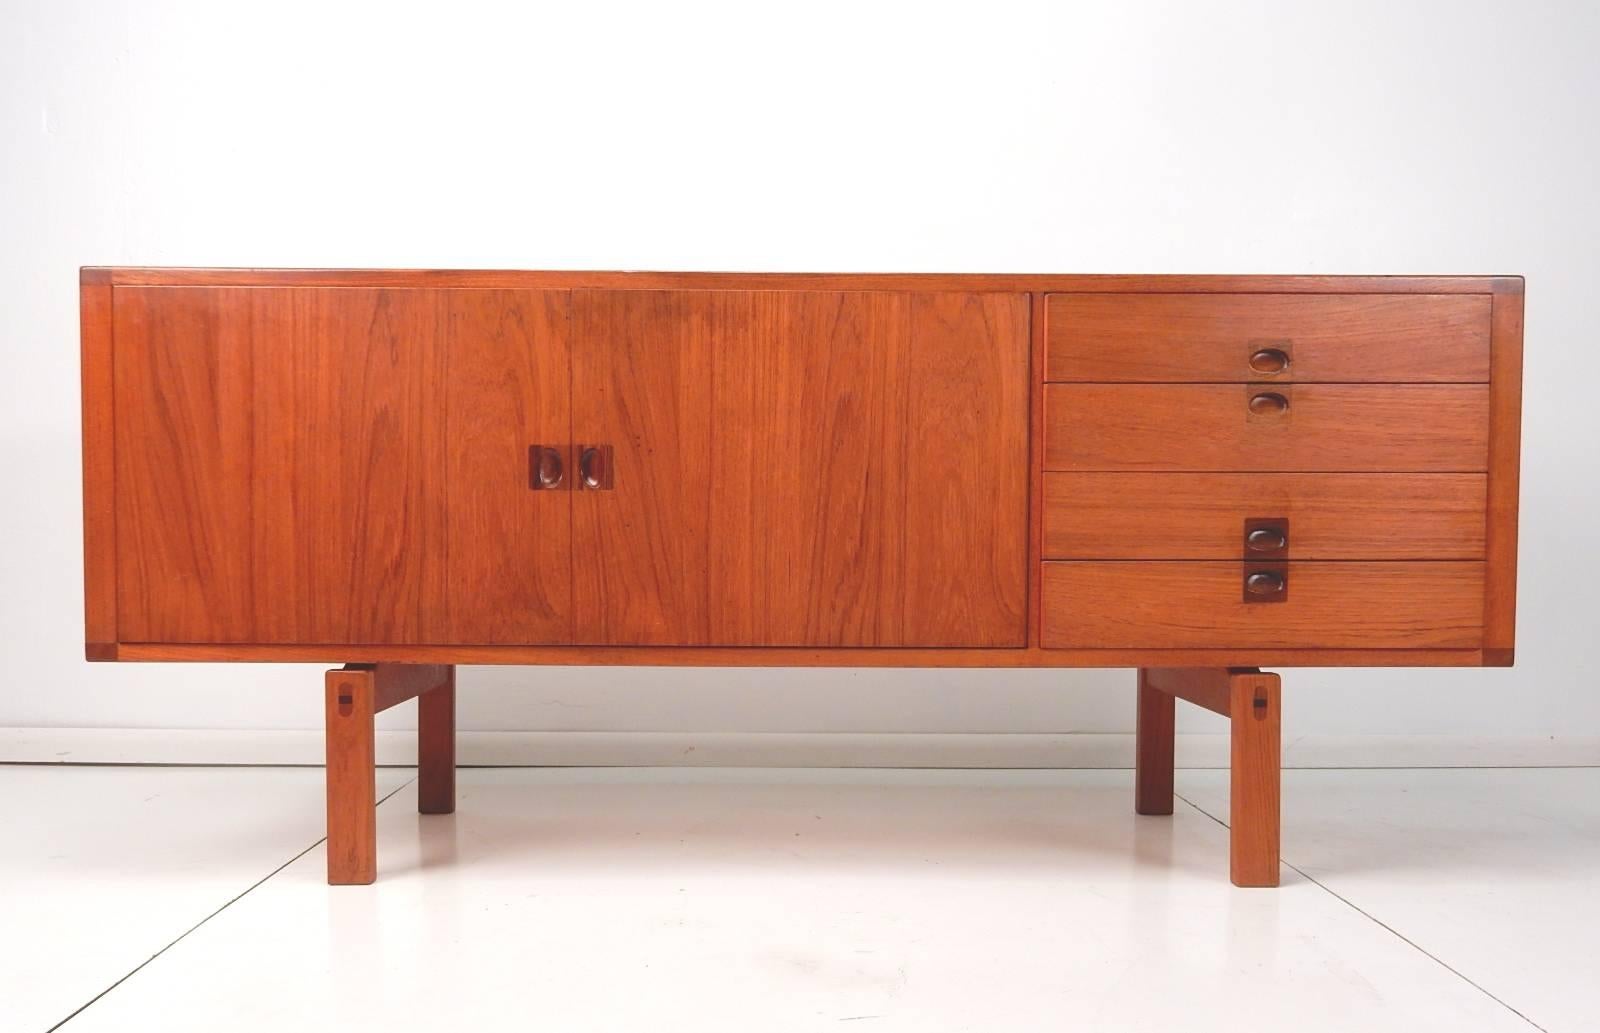 1950s Lennart Bender for Ulferts of Sweden sideboard cabinet from the 'Corona' line.
Teak with rosewood inlay pulls. Beautiful finished back with stupendous grain.
Four drawers with the top being felt lined and a separate mini flatware